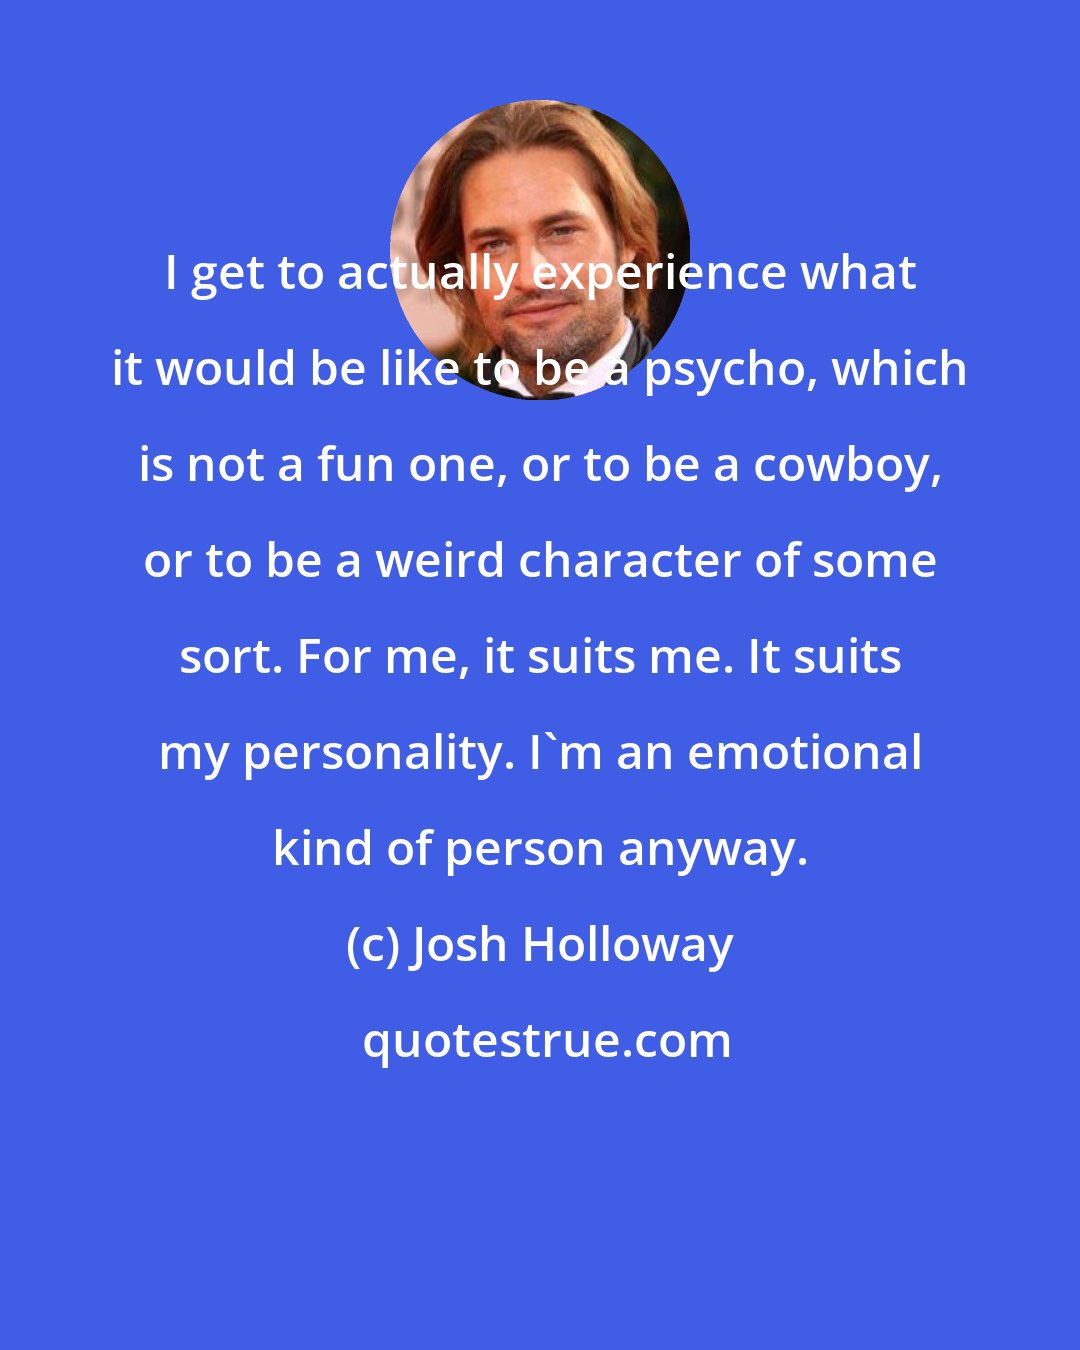 Josh Holloway: I get to actually experience what it would be like to be a psycho, which is not a fun one, or to be a cowboy, or to be a weird character of some sort. For me, it suits me. It suits my personality. I'm an emotional kind of person anyway.